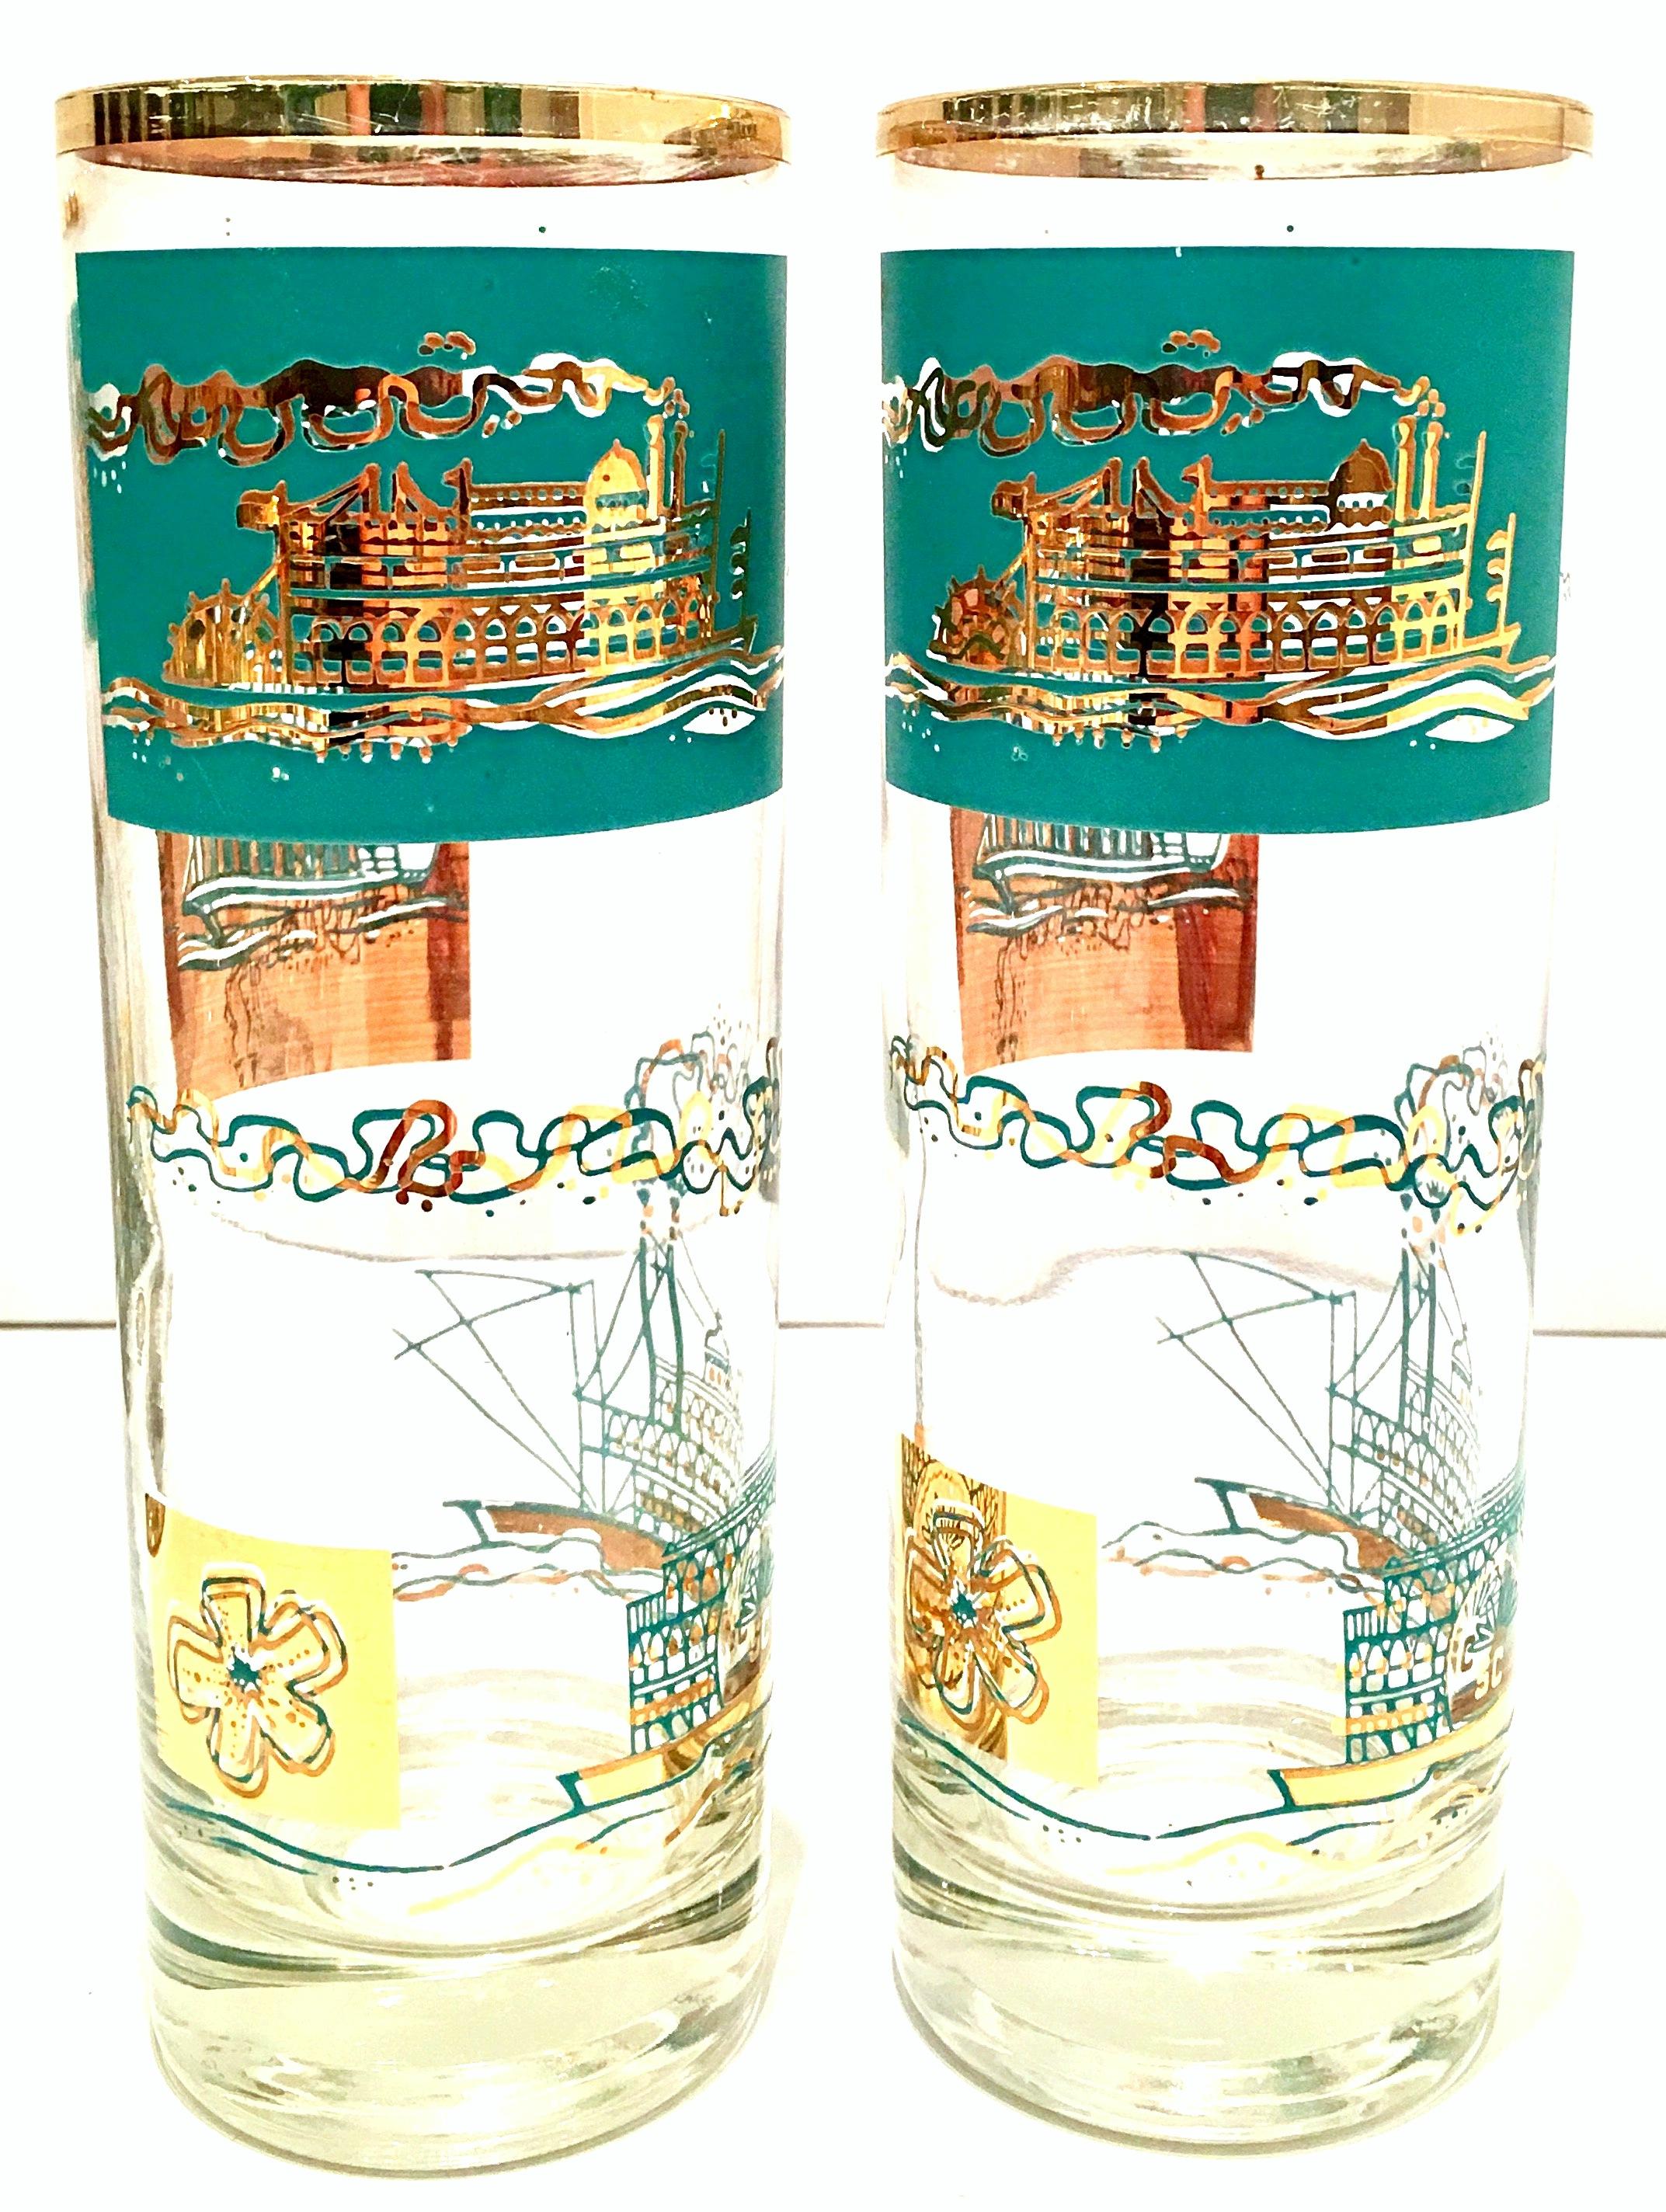 Mid-20th Century 22-karat gold and turquoise river boat motif drink glasses, set of 14 pieces.
Set includes, 8 Tom Collins glasses: 7